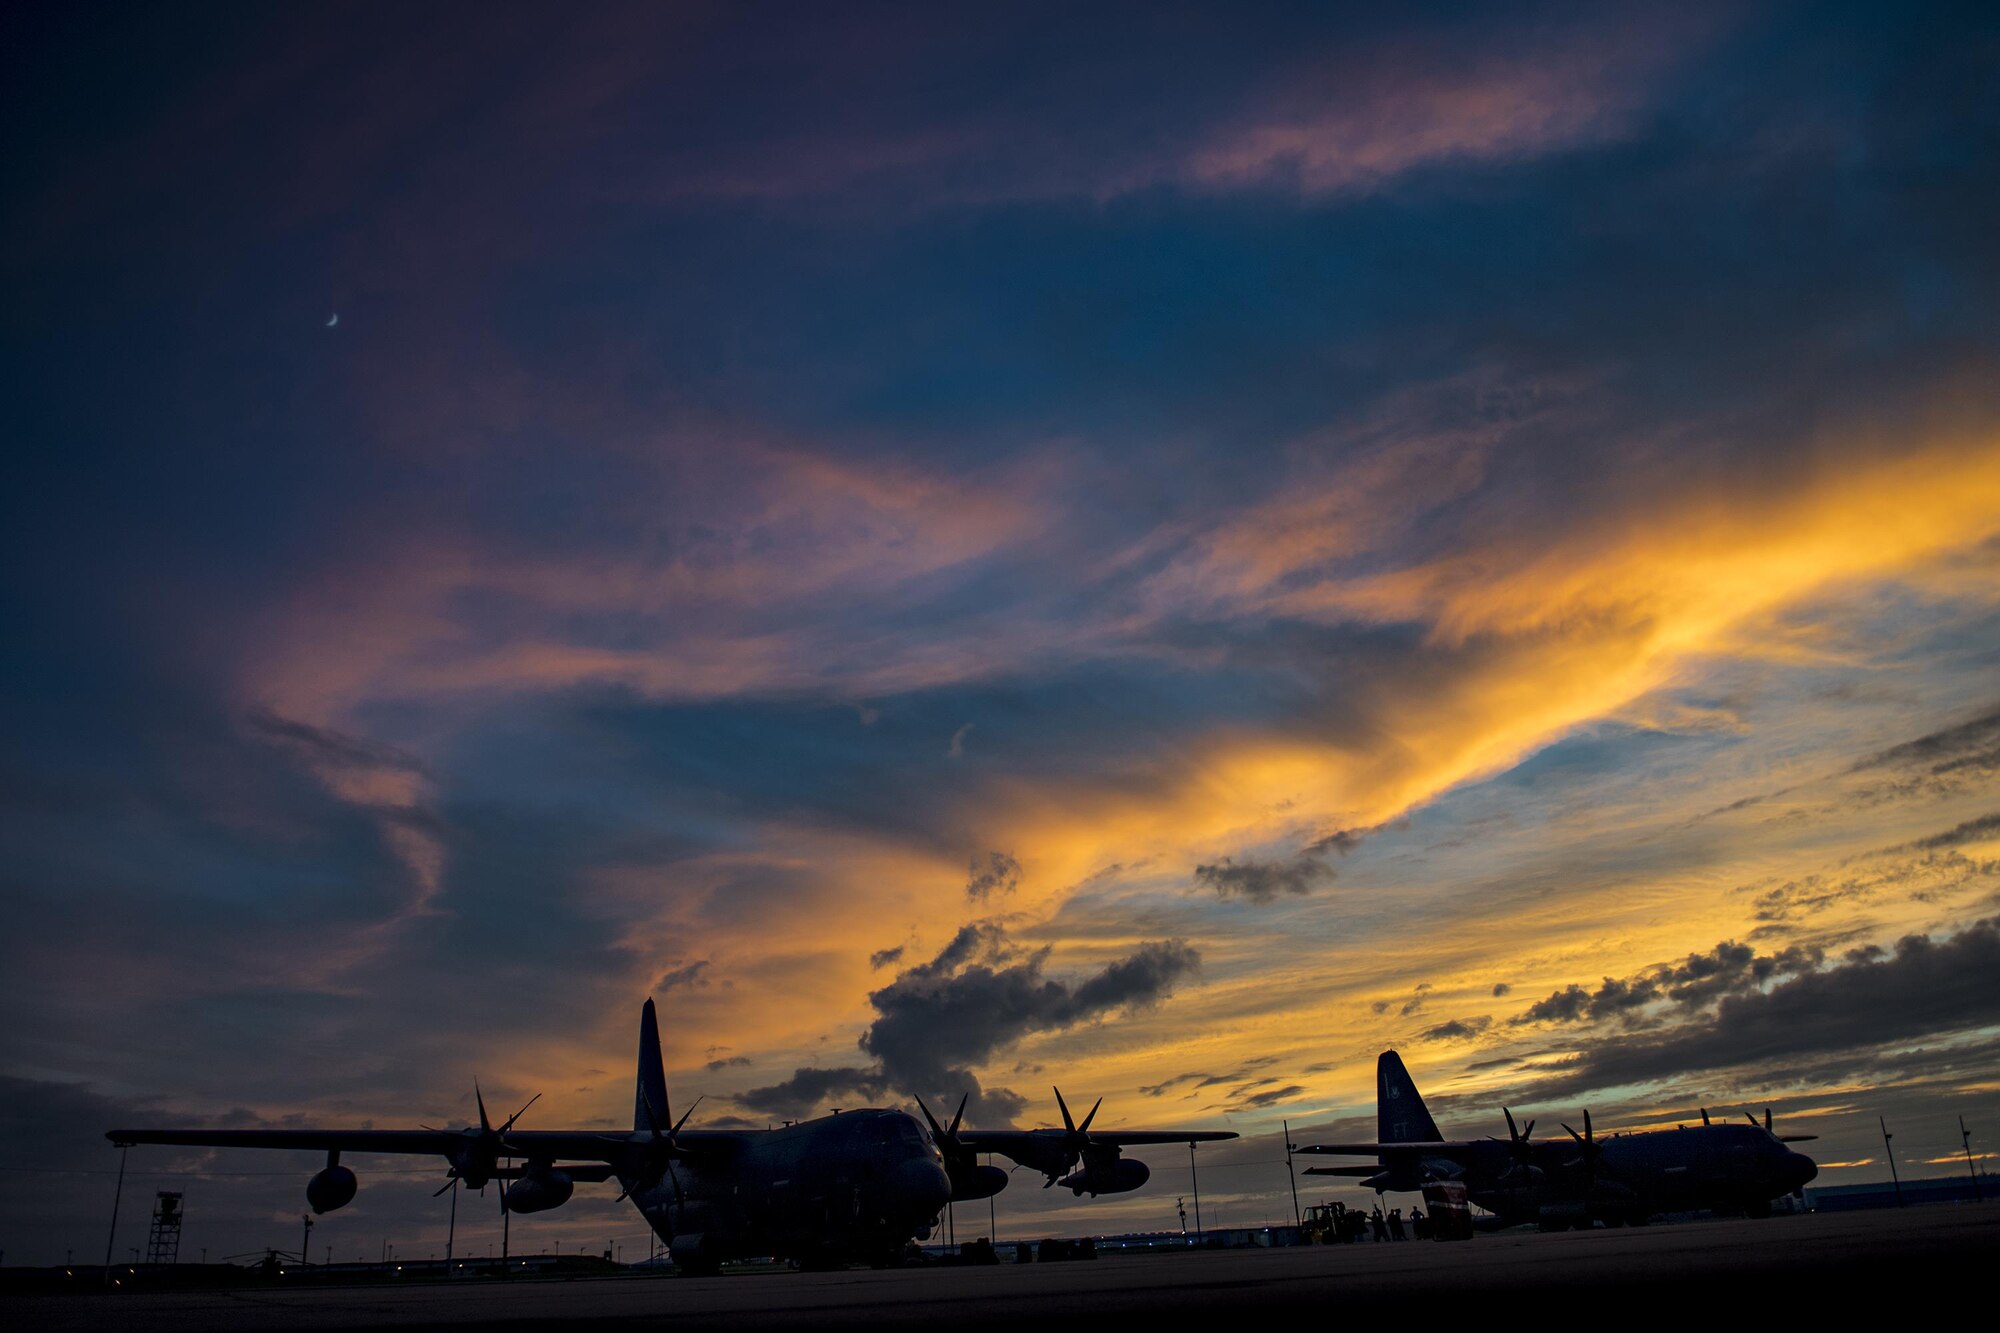 HC-130J Combat King II aircraft from the 71st Rescue Squadron sit on the flightline, Aug. 26, 2017, at Naval Air Station Fort Worth Joint Reserve Base, Texas.